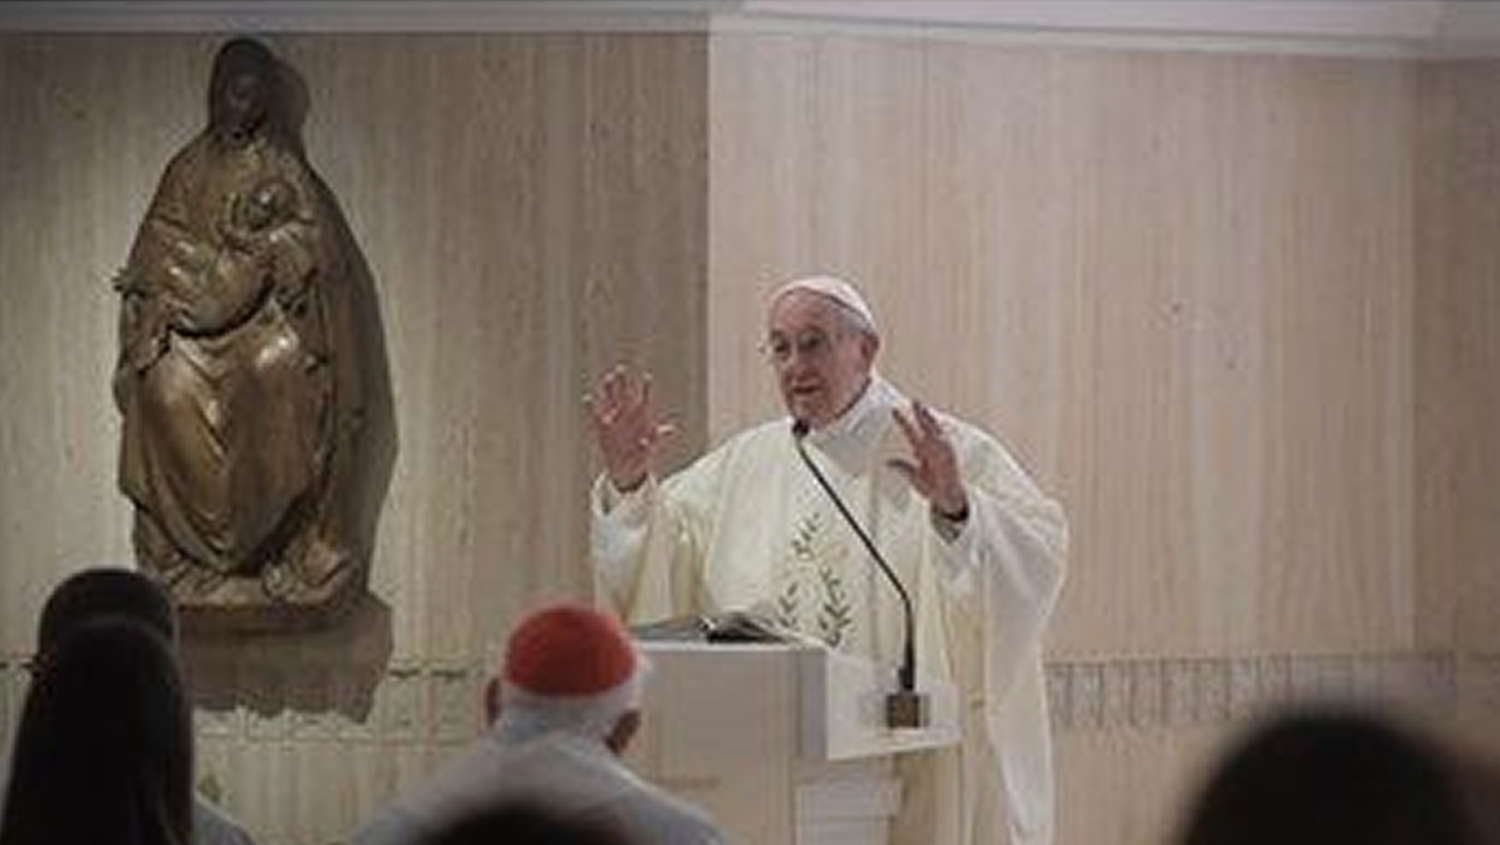 &quot;Don’t dialogue with the devil nor with temptation&quot; says Pope Francis